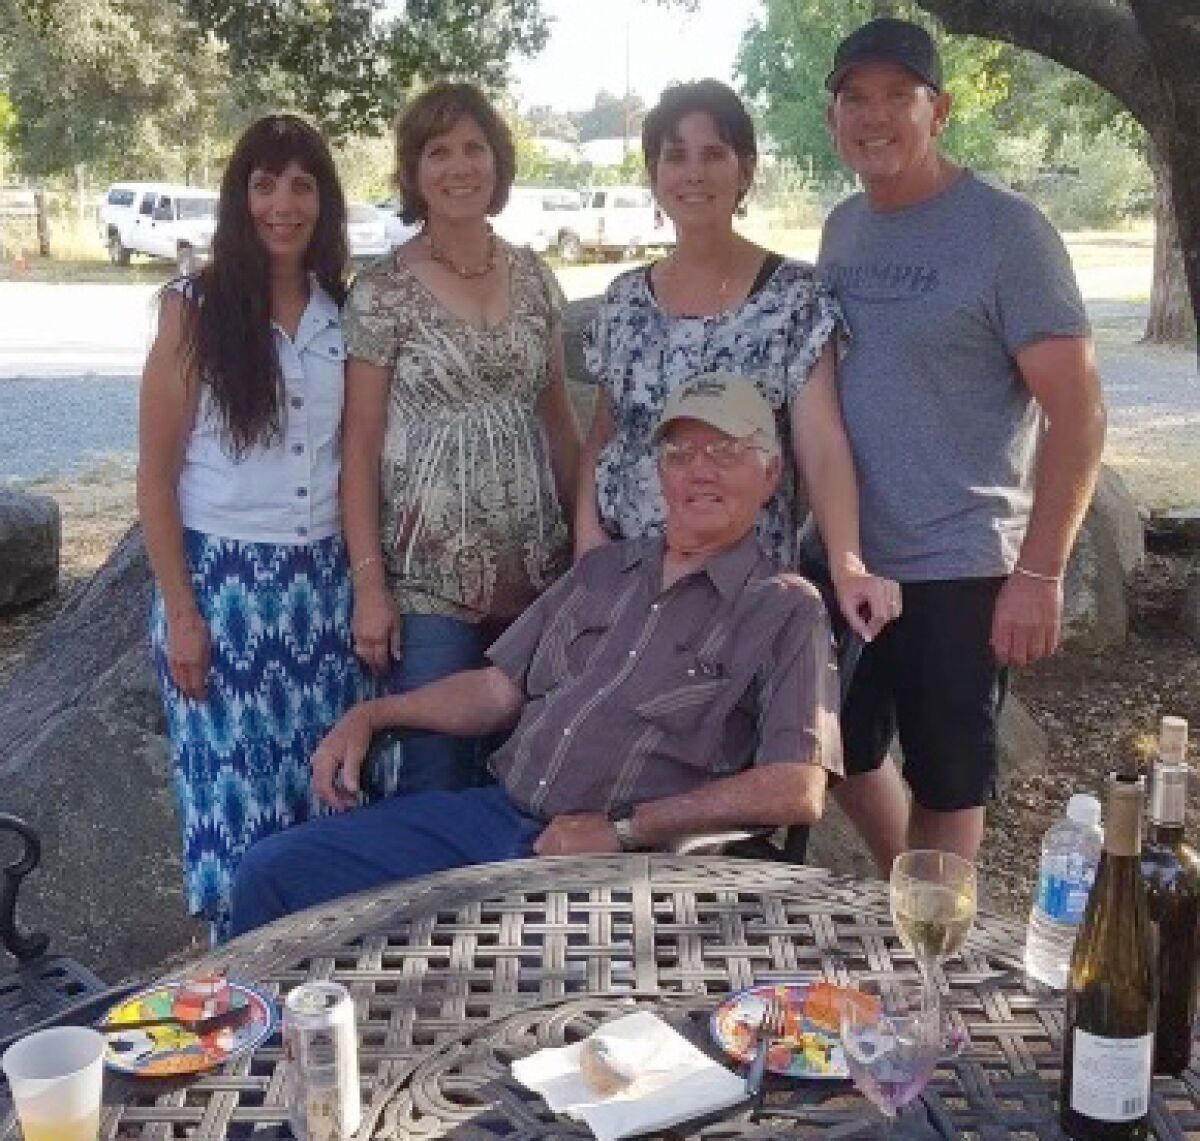 The Vedova family; from left, Suzy Loux, Vicky Bryan, Barbara Stanley, Tony Vedova and dad Jim Vedova in the front.